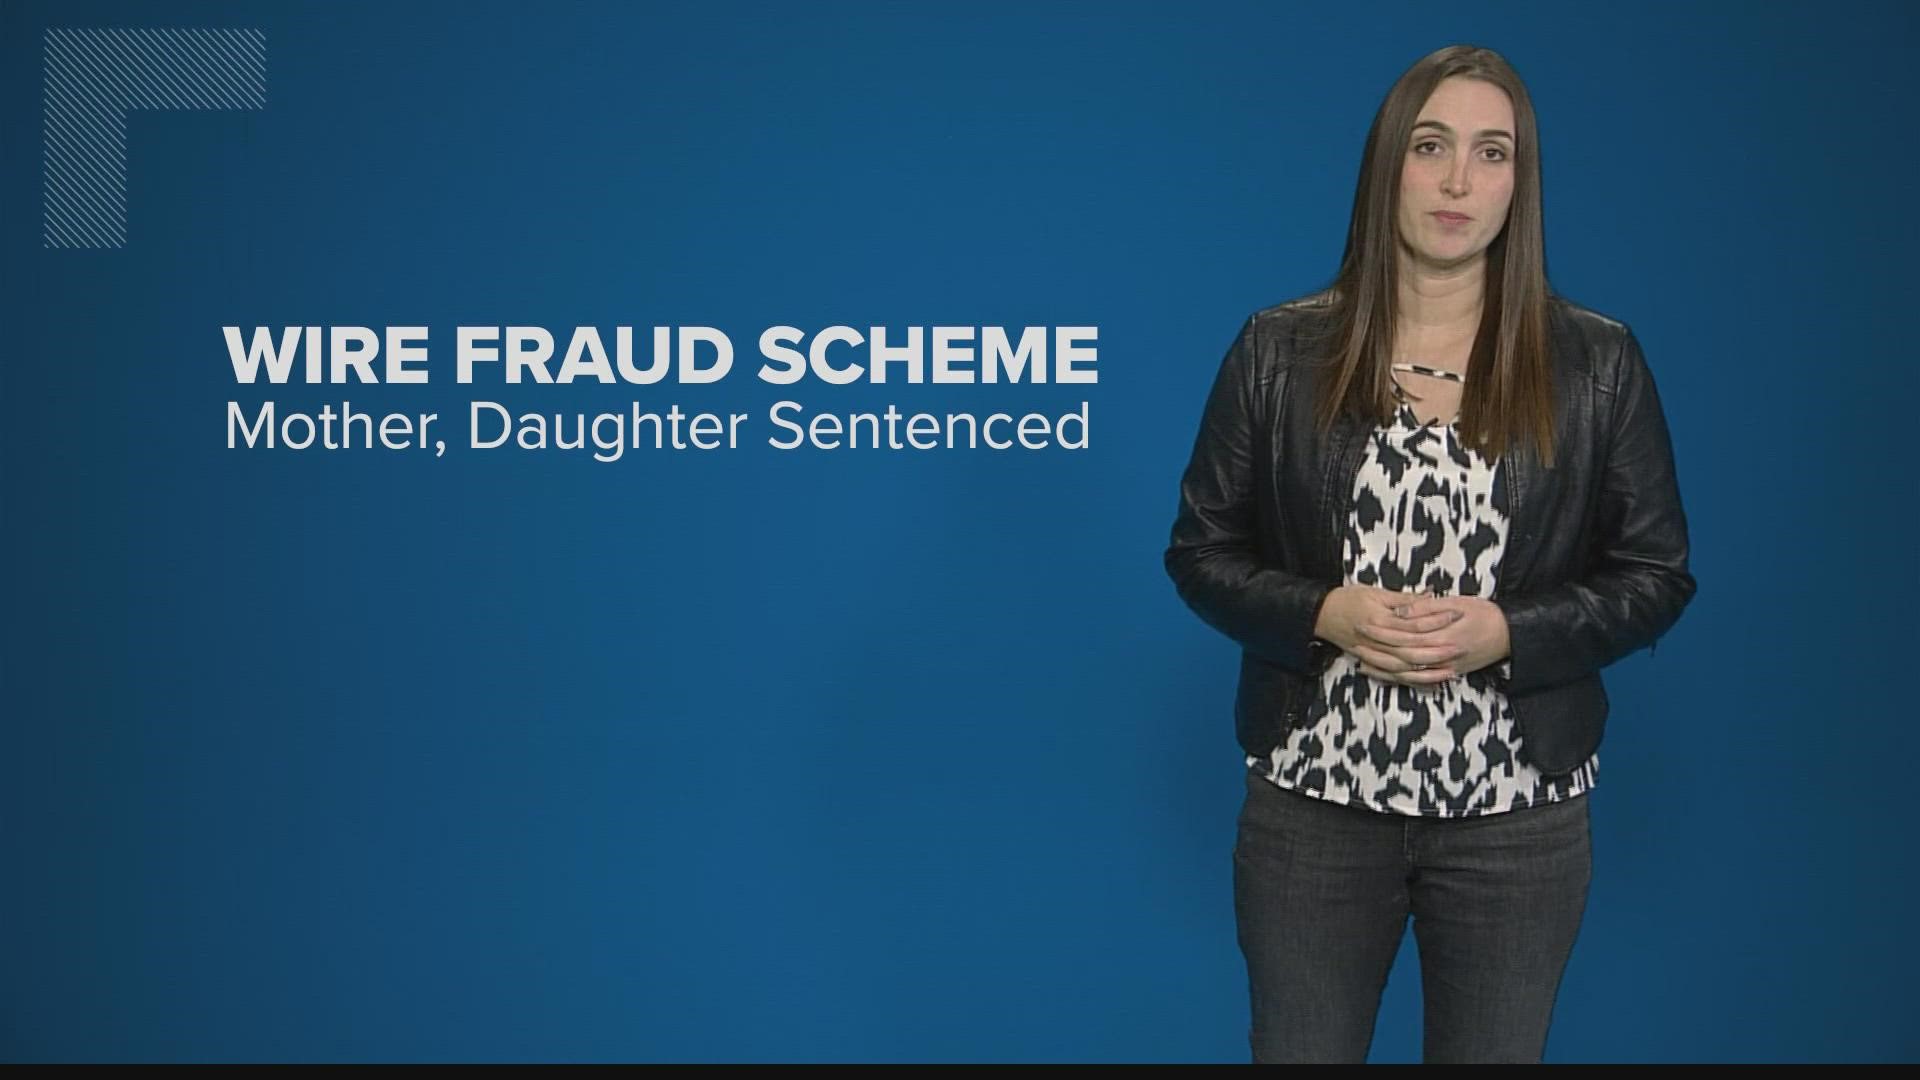 In total, the fraud schemes the women participated in involved more than $95,000.